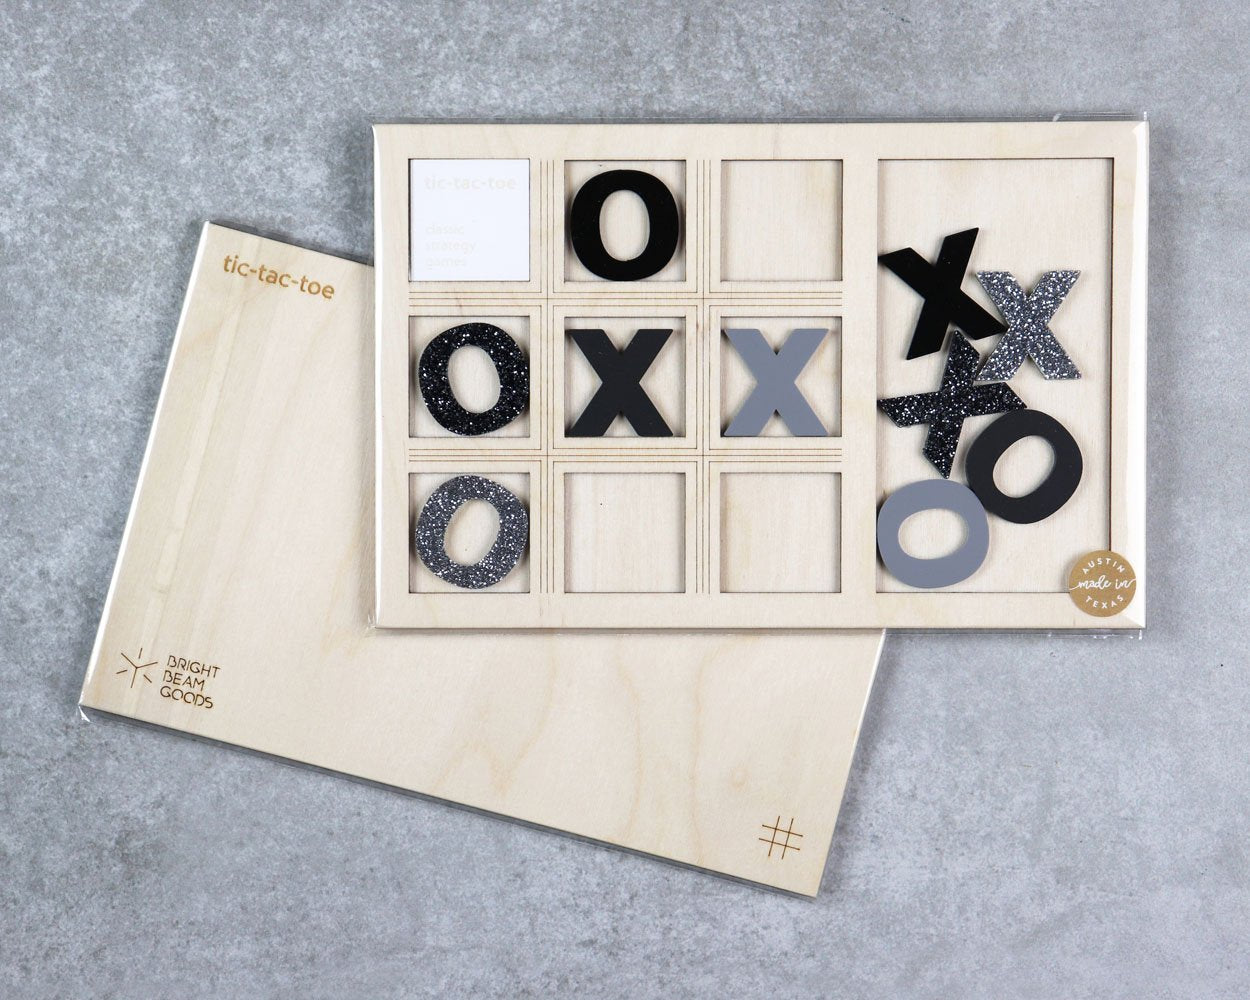 Stardust tic-tac-toe game in packaging